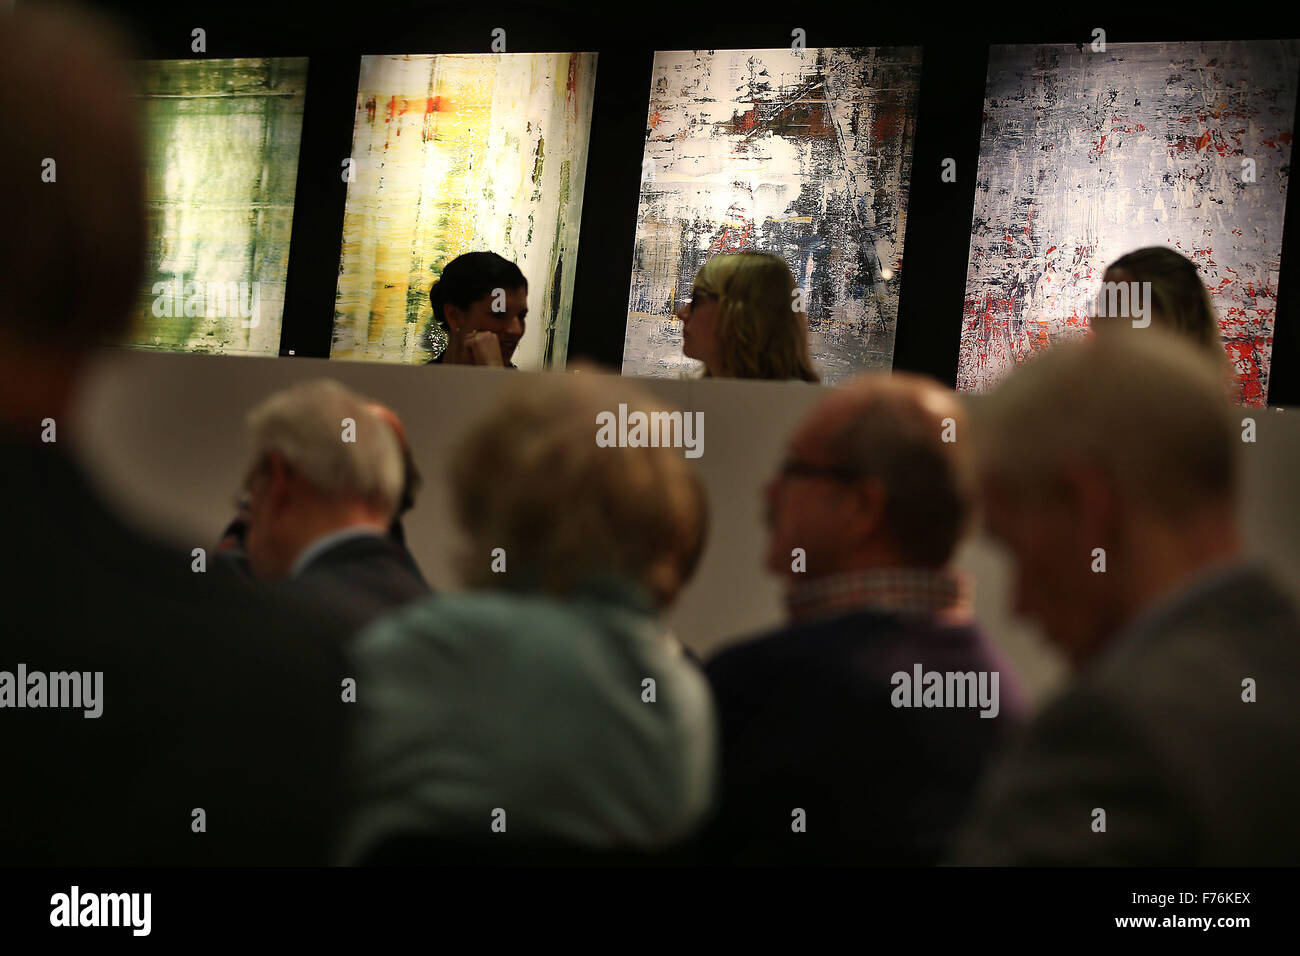 Customers follow an art auction at the Van Ham auction house in front of paintings by the artist Gerhard Richter in Cologne, Germany, 26 November 2015. Pieces by Gerhard Richter are being auctioned in support of the Duesseldorf-based street magazine 'fiftyfifty' at the Van Ham auction house. Photo: OLIVER BERG/dpa Stock Photo